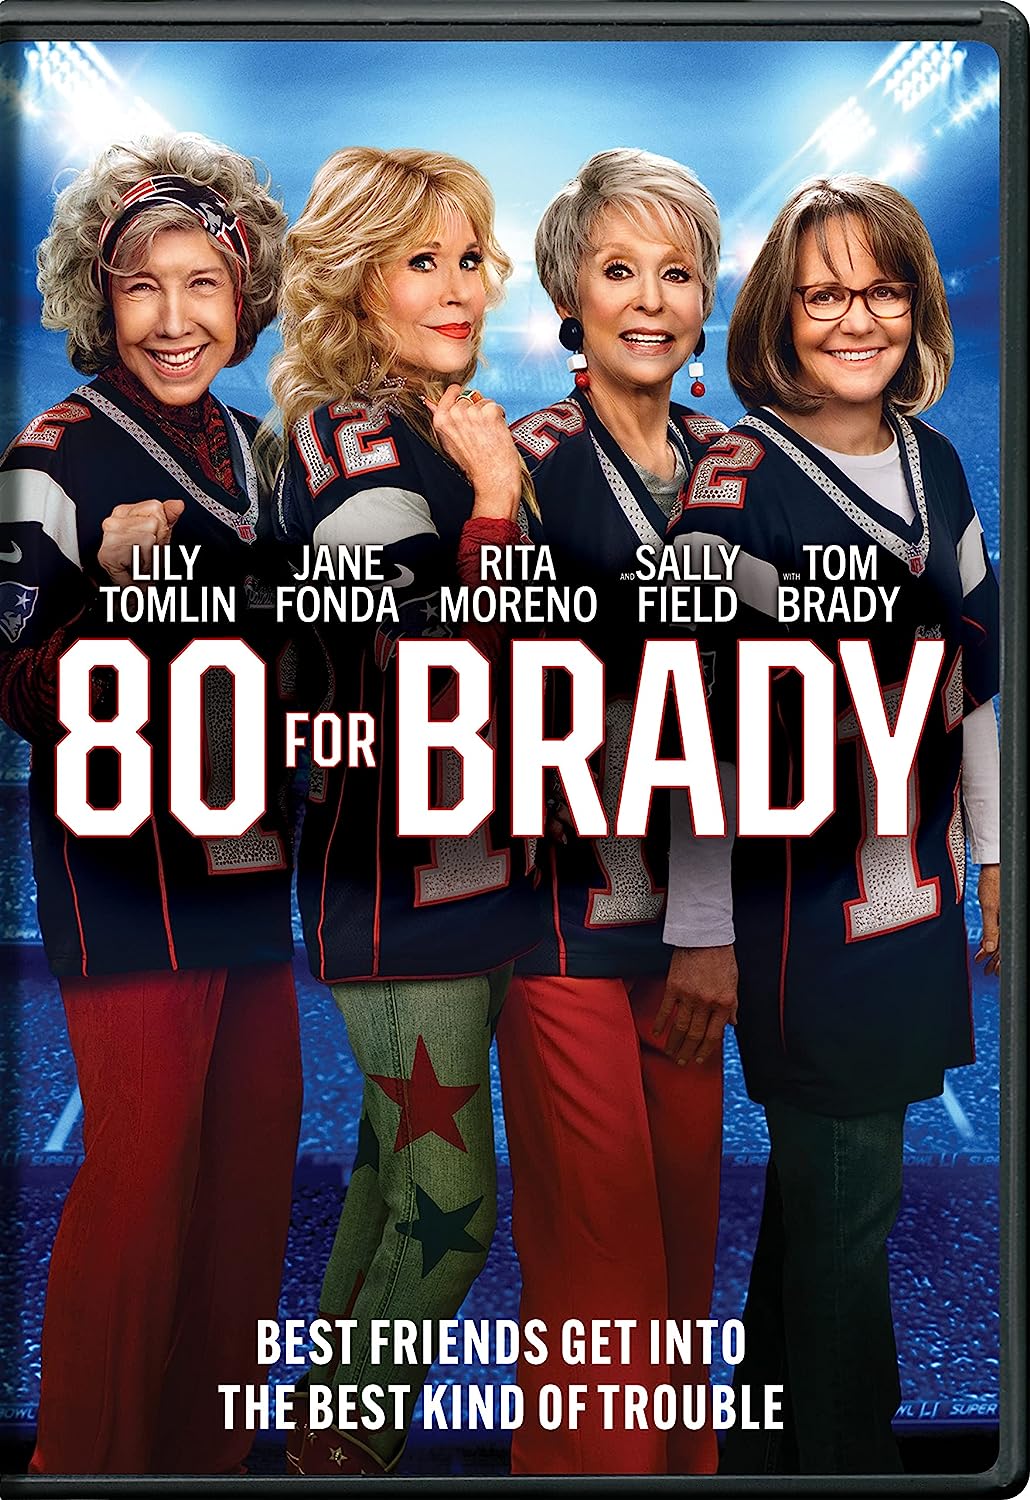 Image for "80 for Brady"